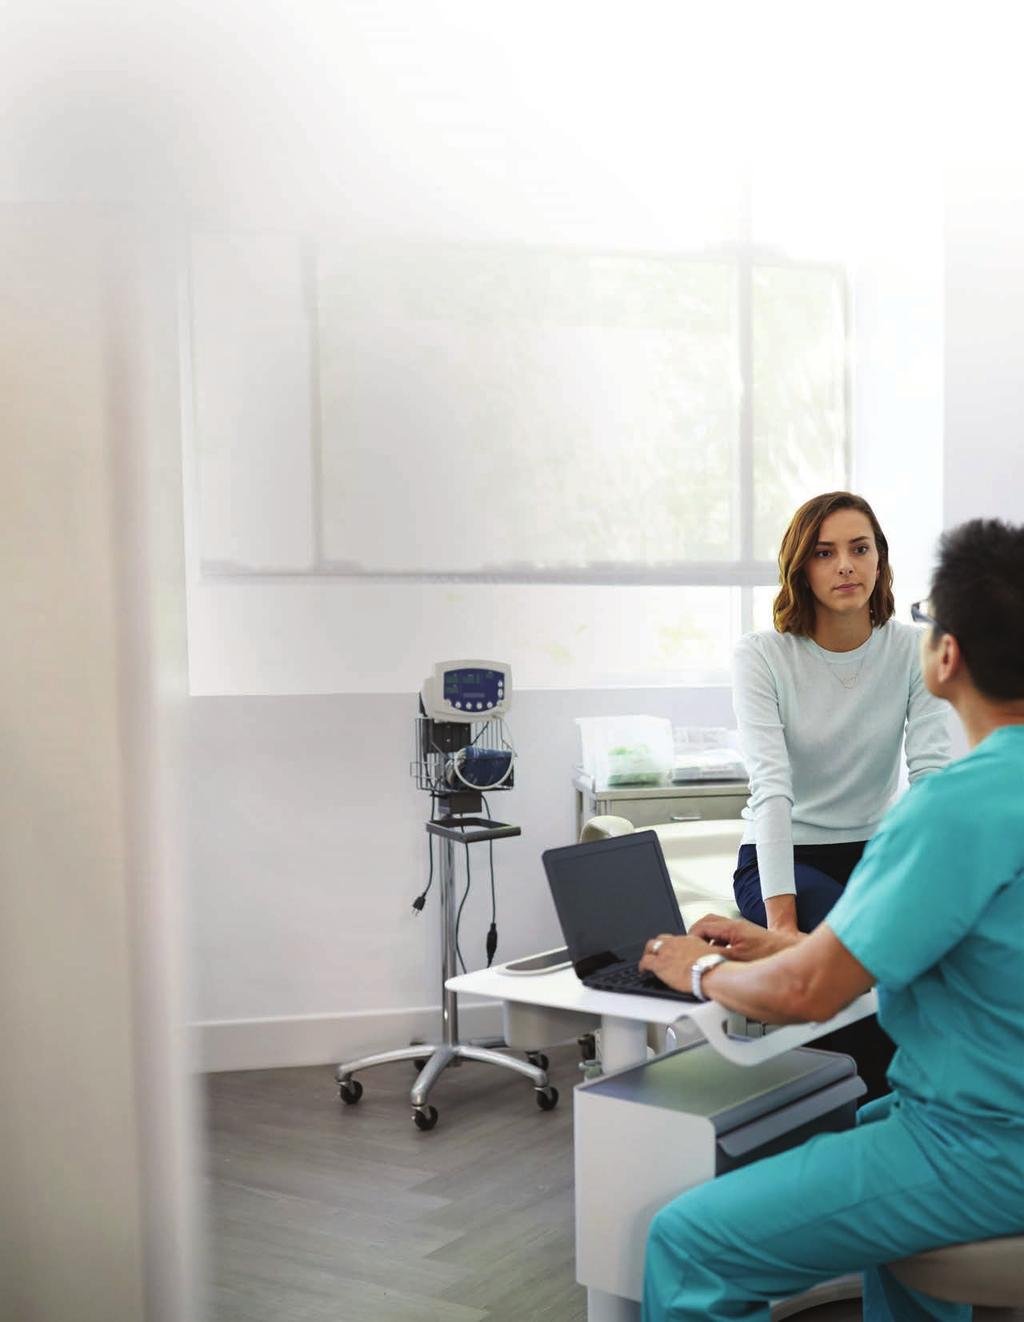 Accelerate Healthcare Transformation and Clinician Workflows with a Secure Digital Workspace Give